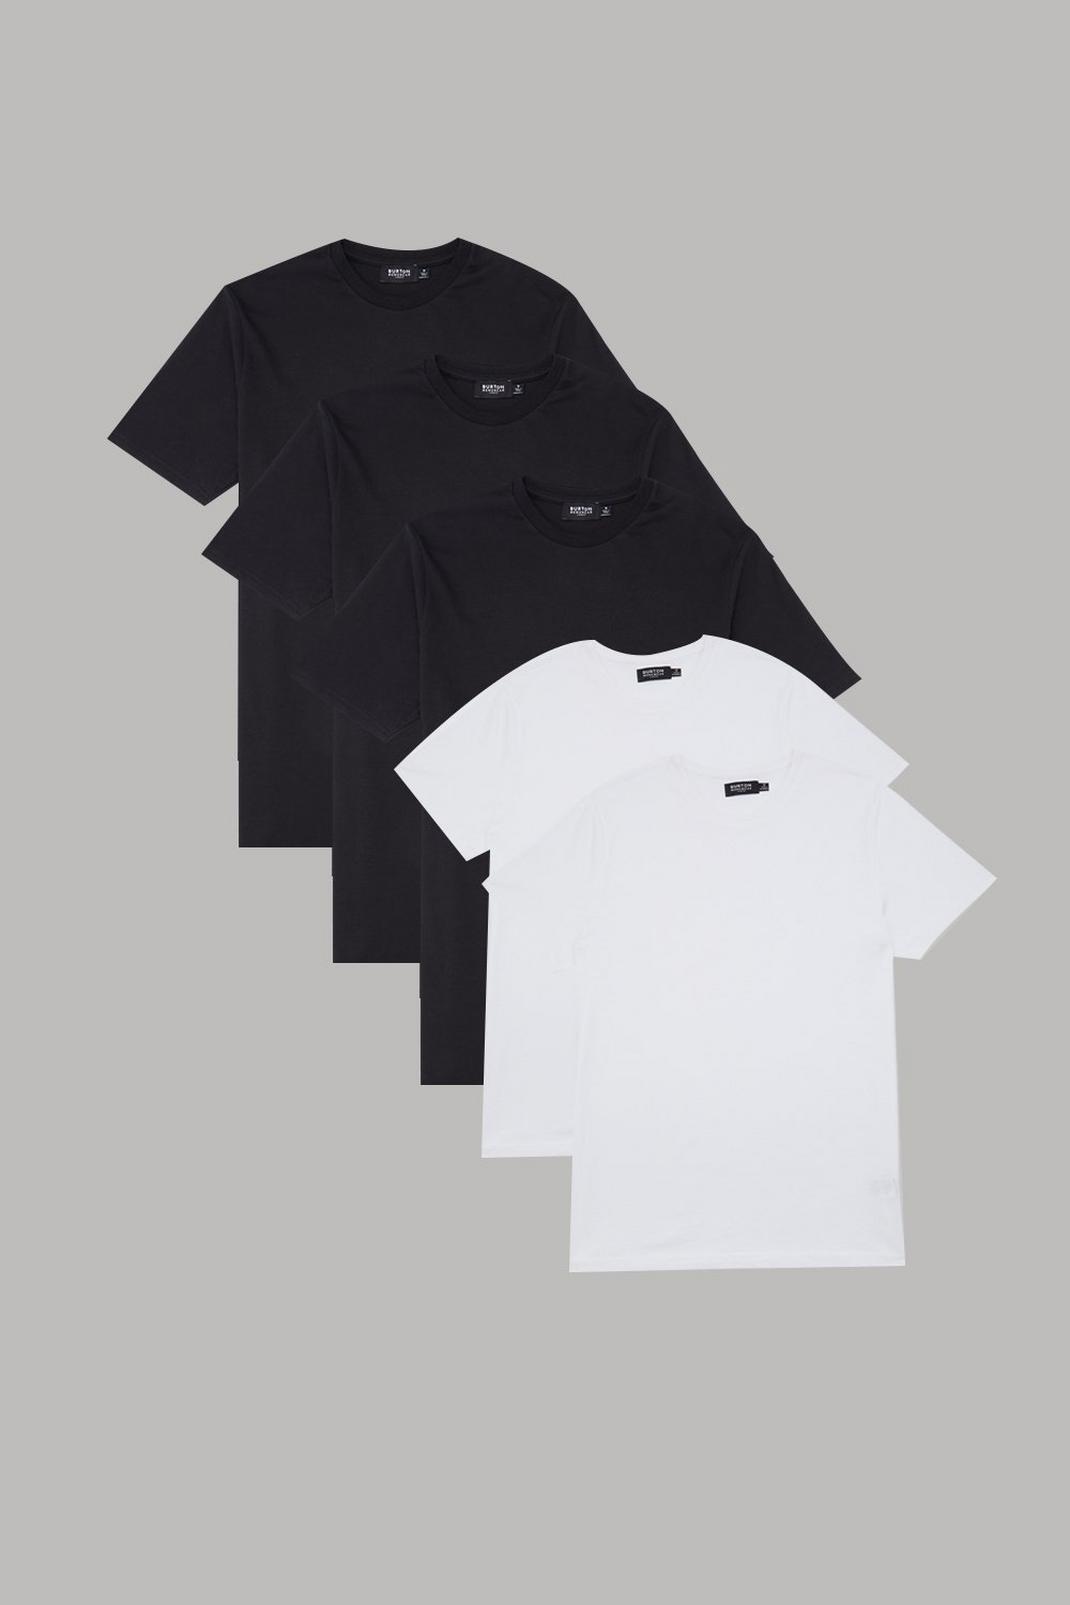 Black and White Slim Fit 5 Pack T-Shirt image number 1